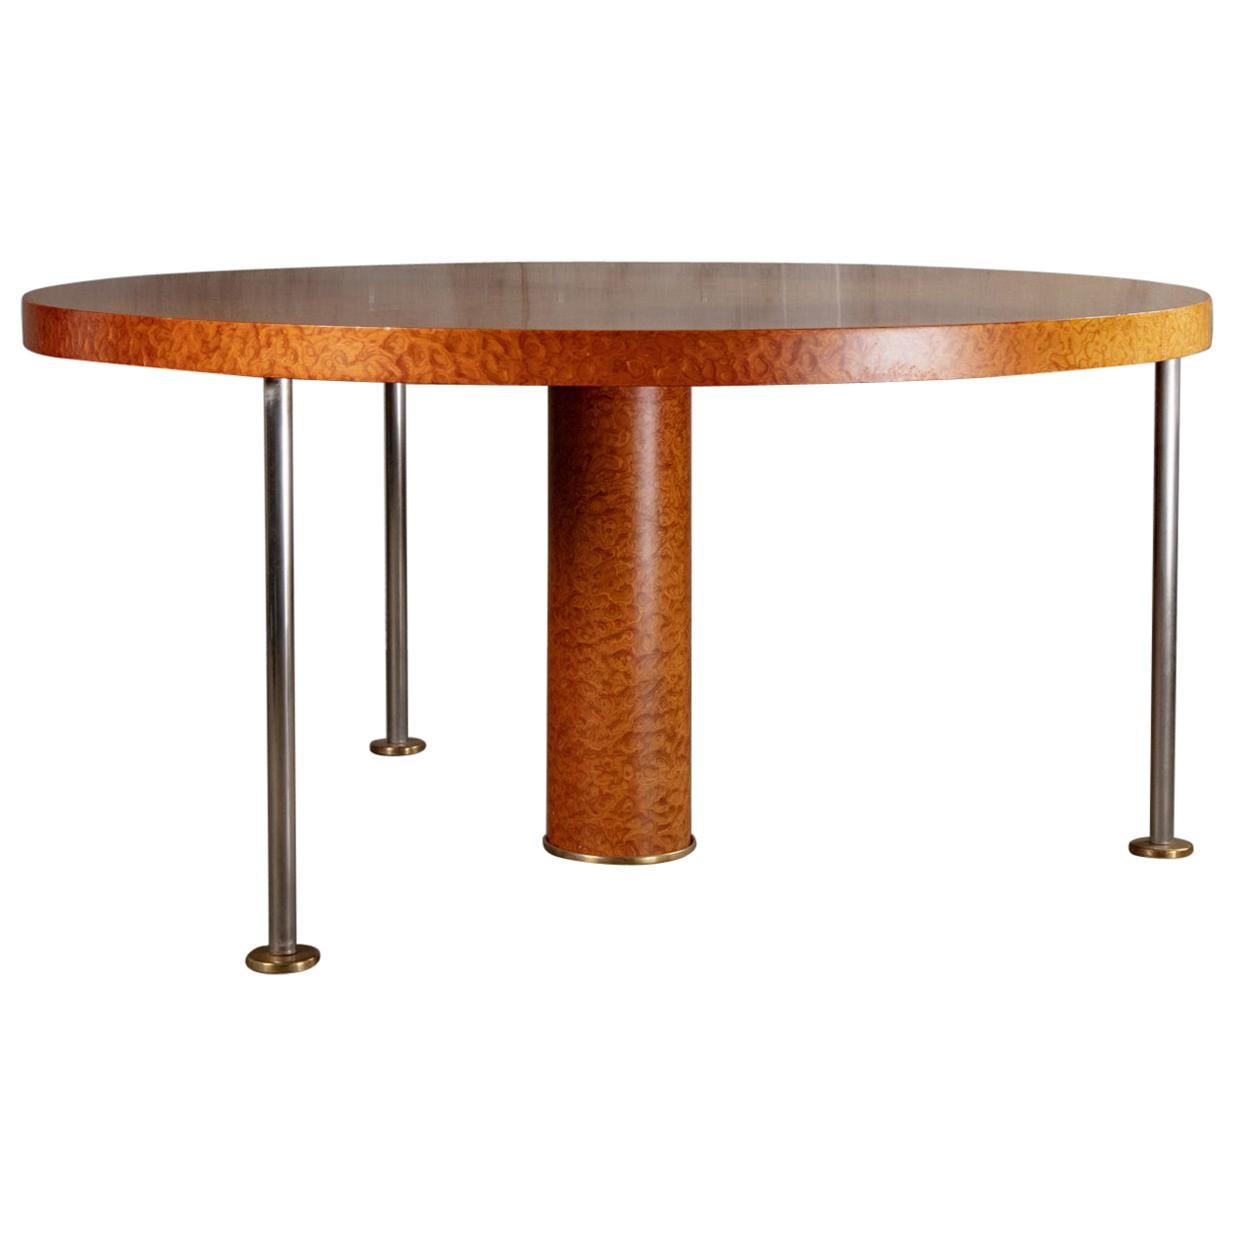 Ettore Sottsass 'Ospite' Dining Table